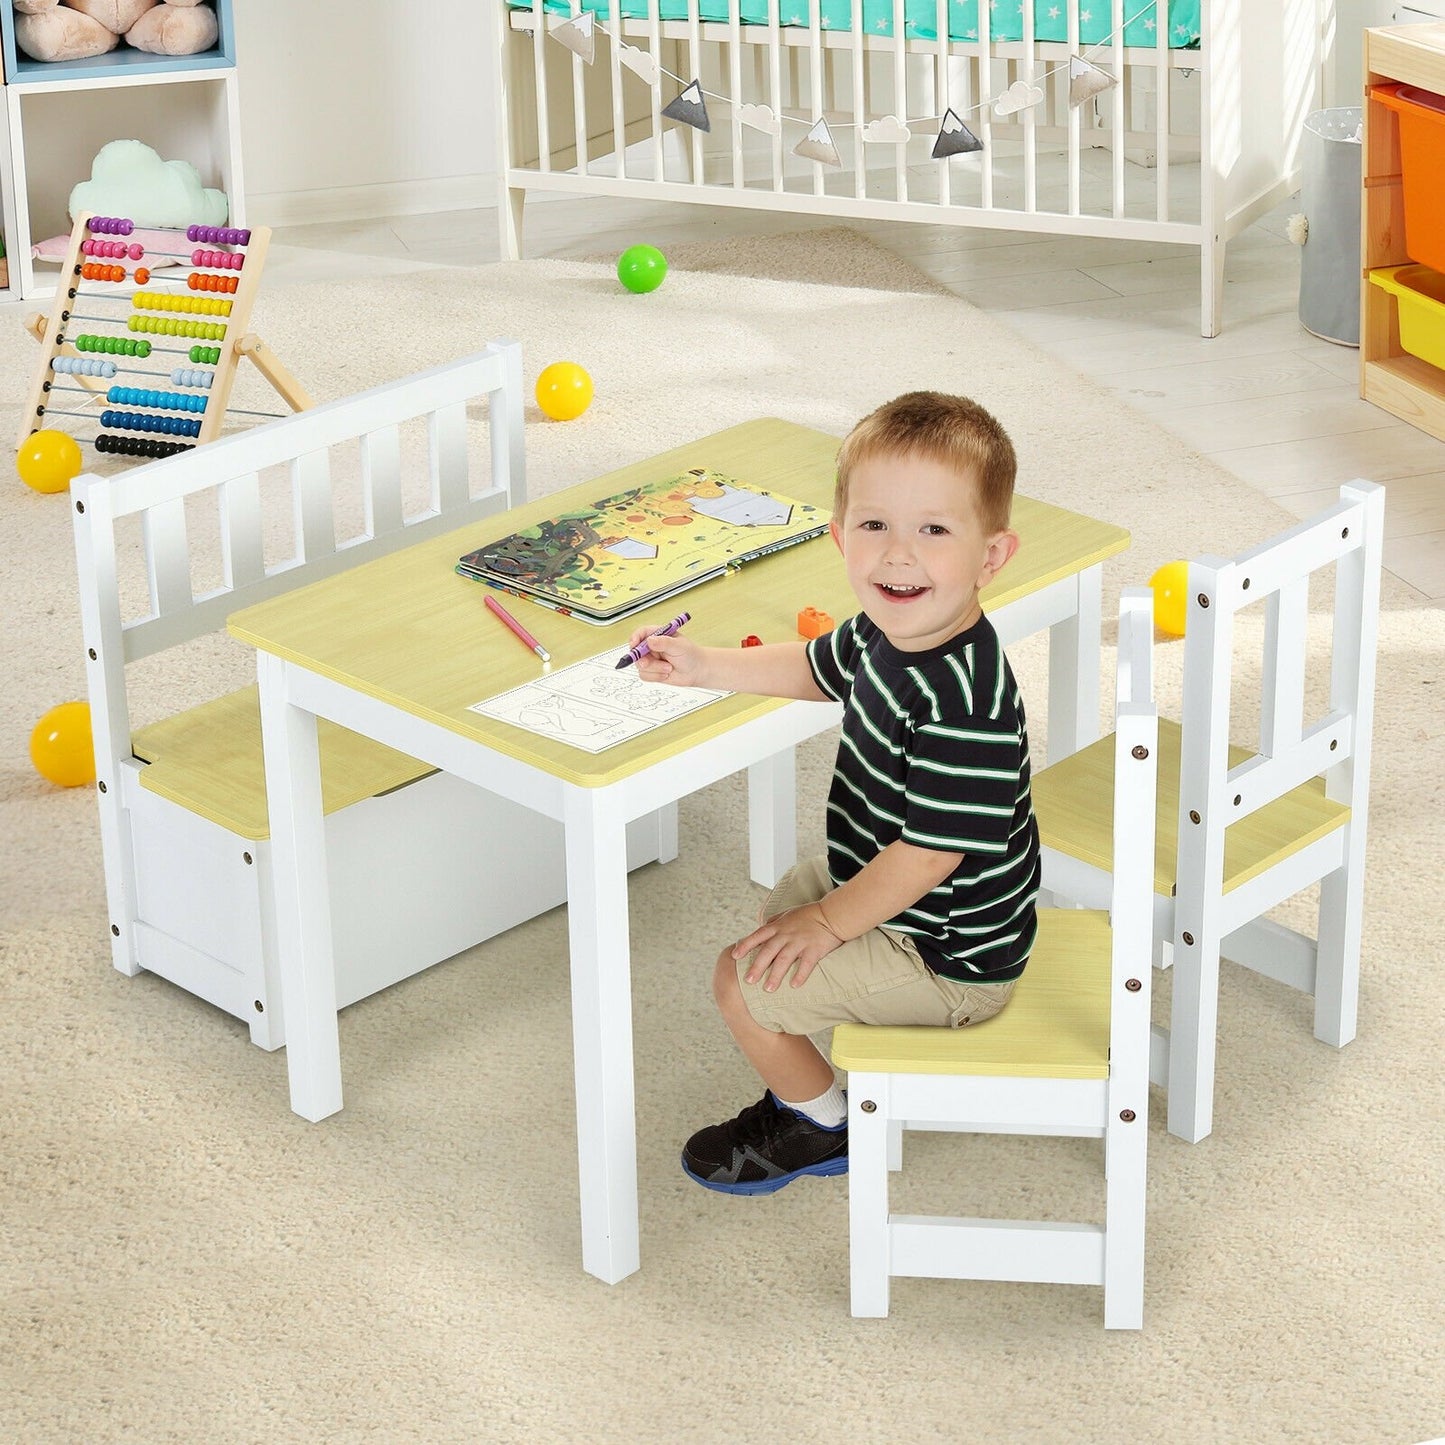 4 Pieces Kids Wooden Activity Table and Chairs Set with Storage Bench and Study Desk, Natural - Gallery Canada